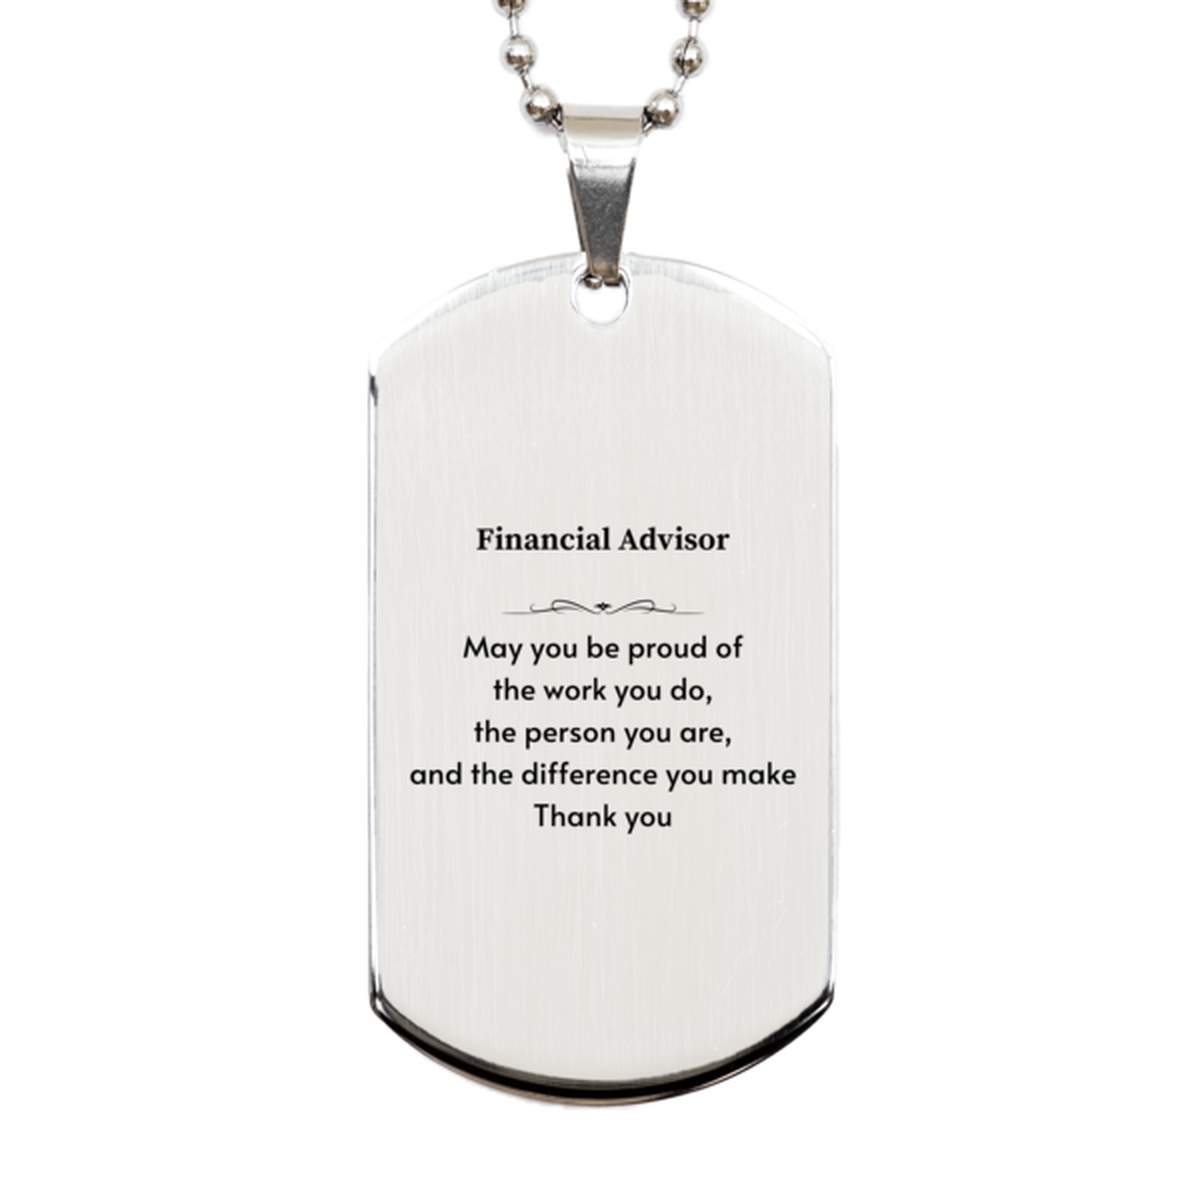 Heartwarming Silver Dog Tag Retirement Coworkers Gifts for Financial Advisor, Financial Advisor May You be proud of the work you do, the person you are Gifts for Boss Men Women Friends